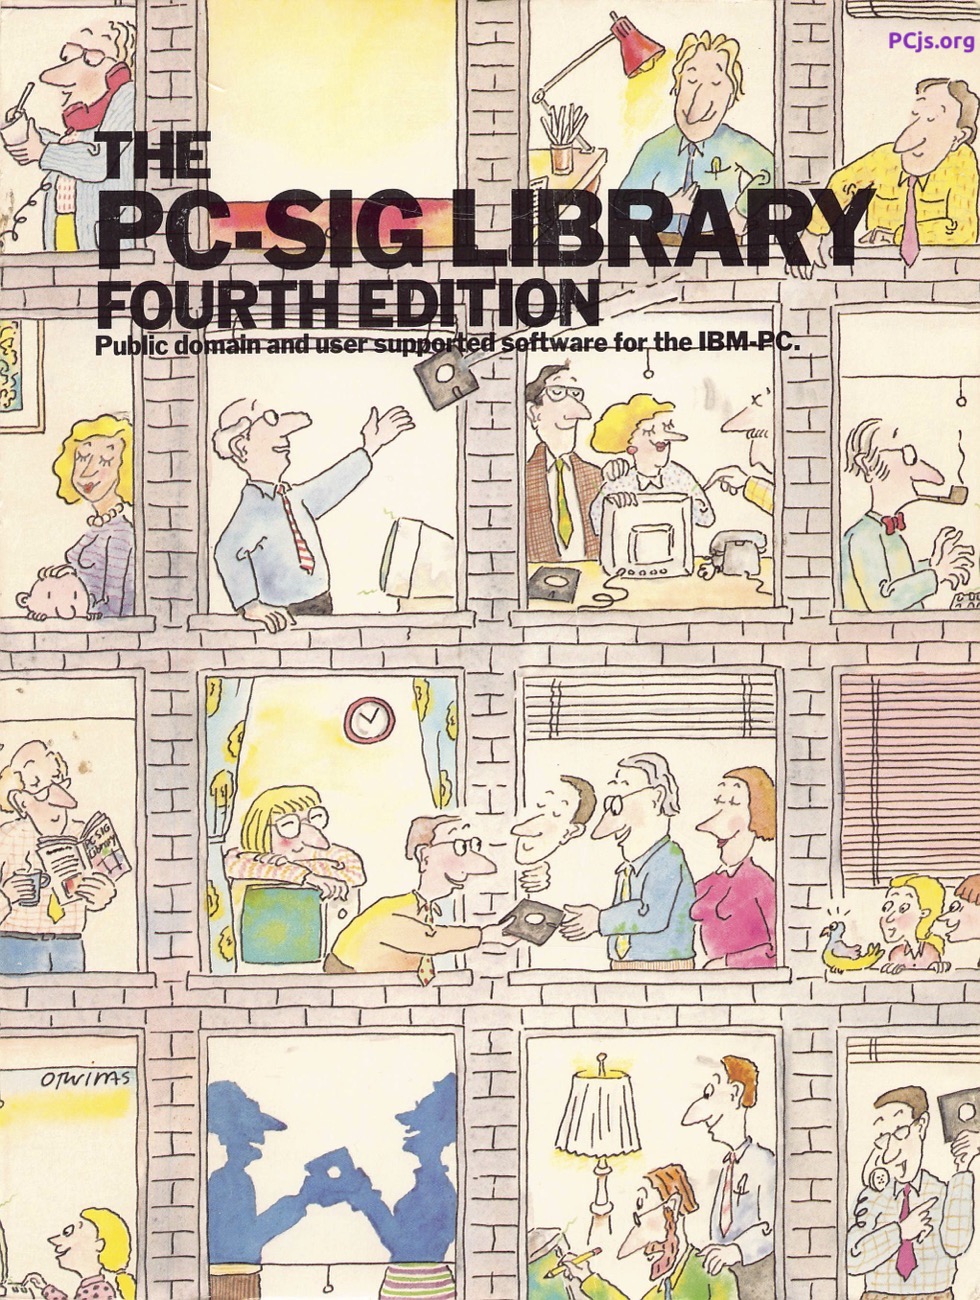 PC-SIG Library 4th Edition (March 1987)